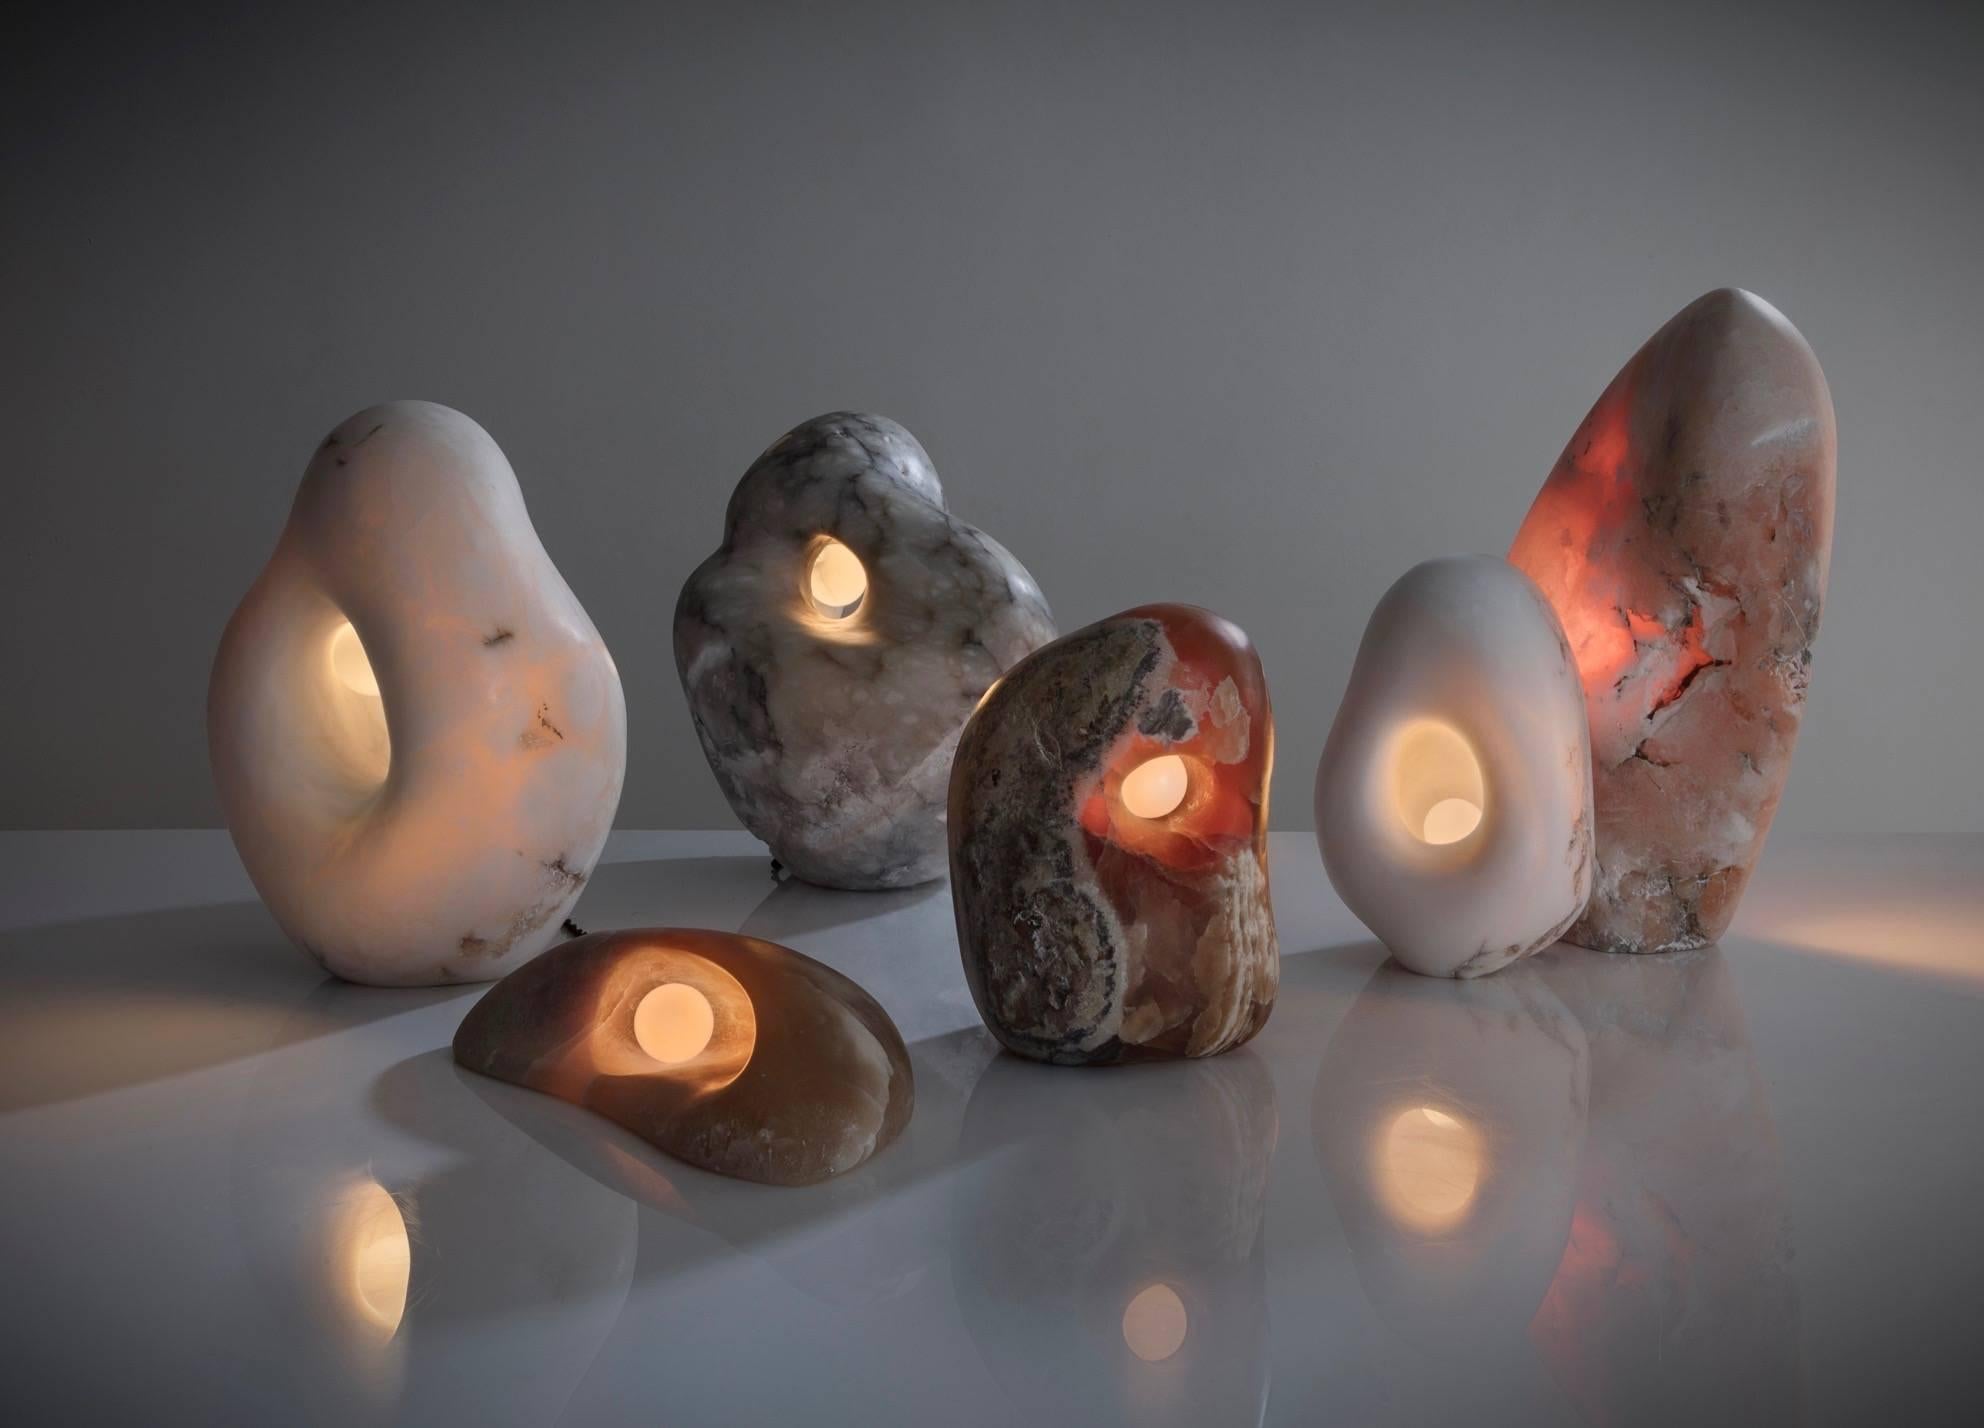 A series of fertility form sculptural lamps in hand-carved translucent alabaster, agate, or calcite. Each piece is unique and each is hand carved and polished.
An ingenious round brass touch control on the back of each sculptural light is used to